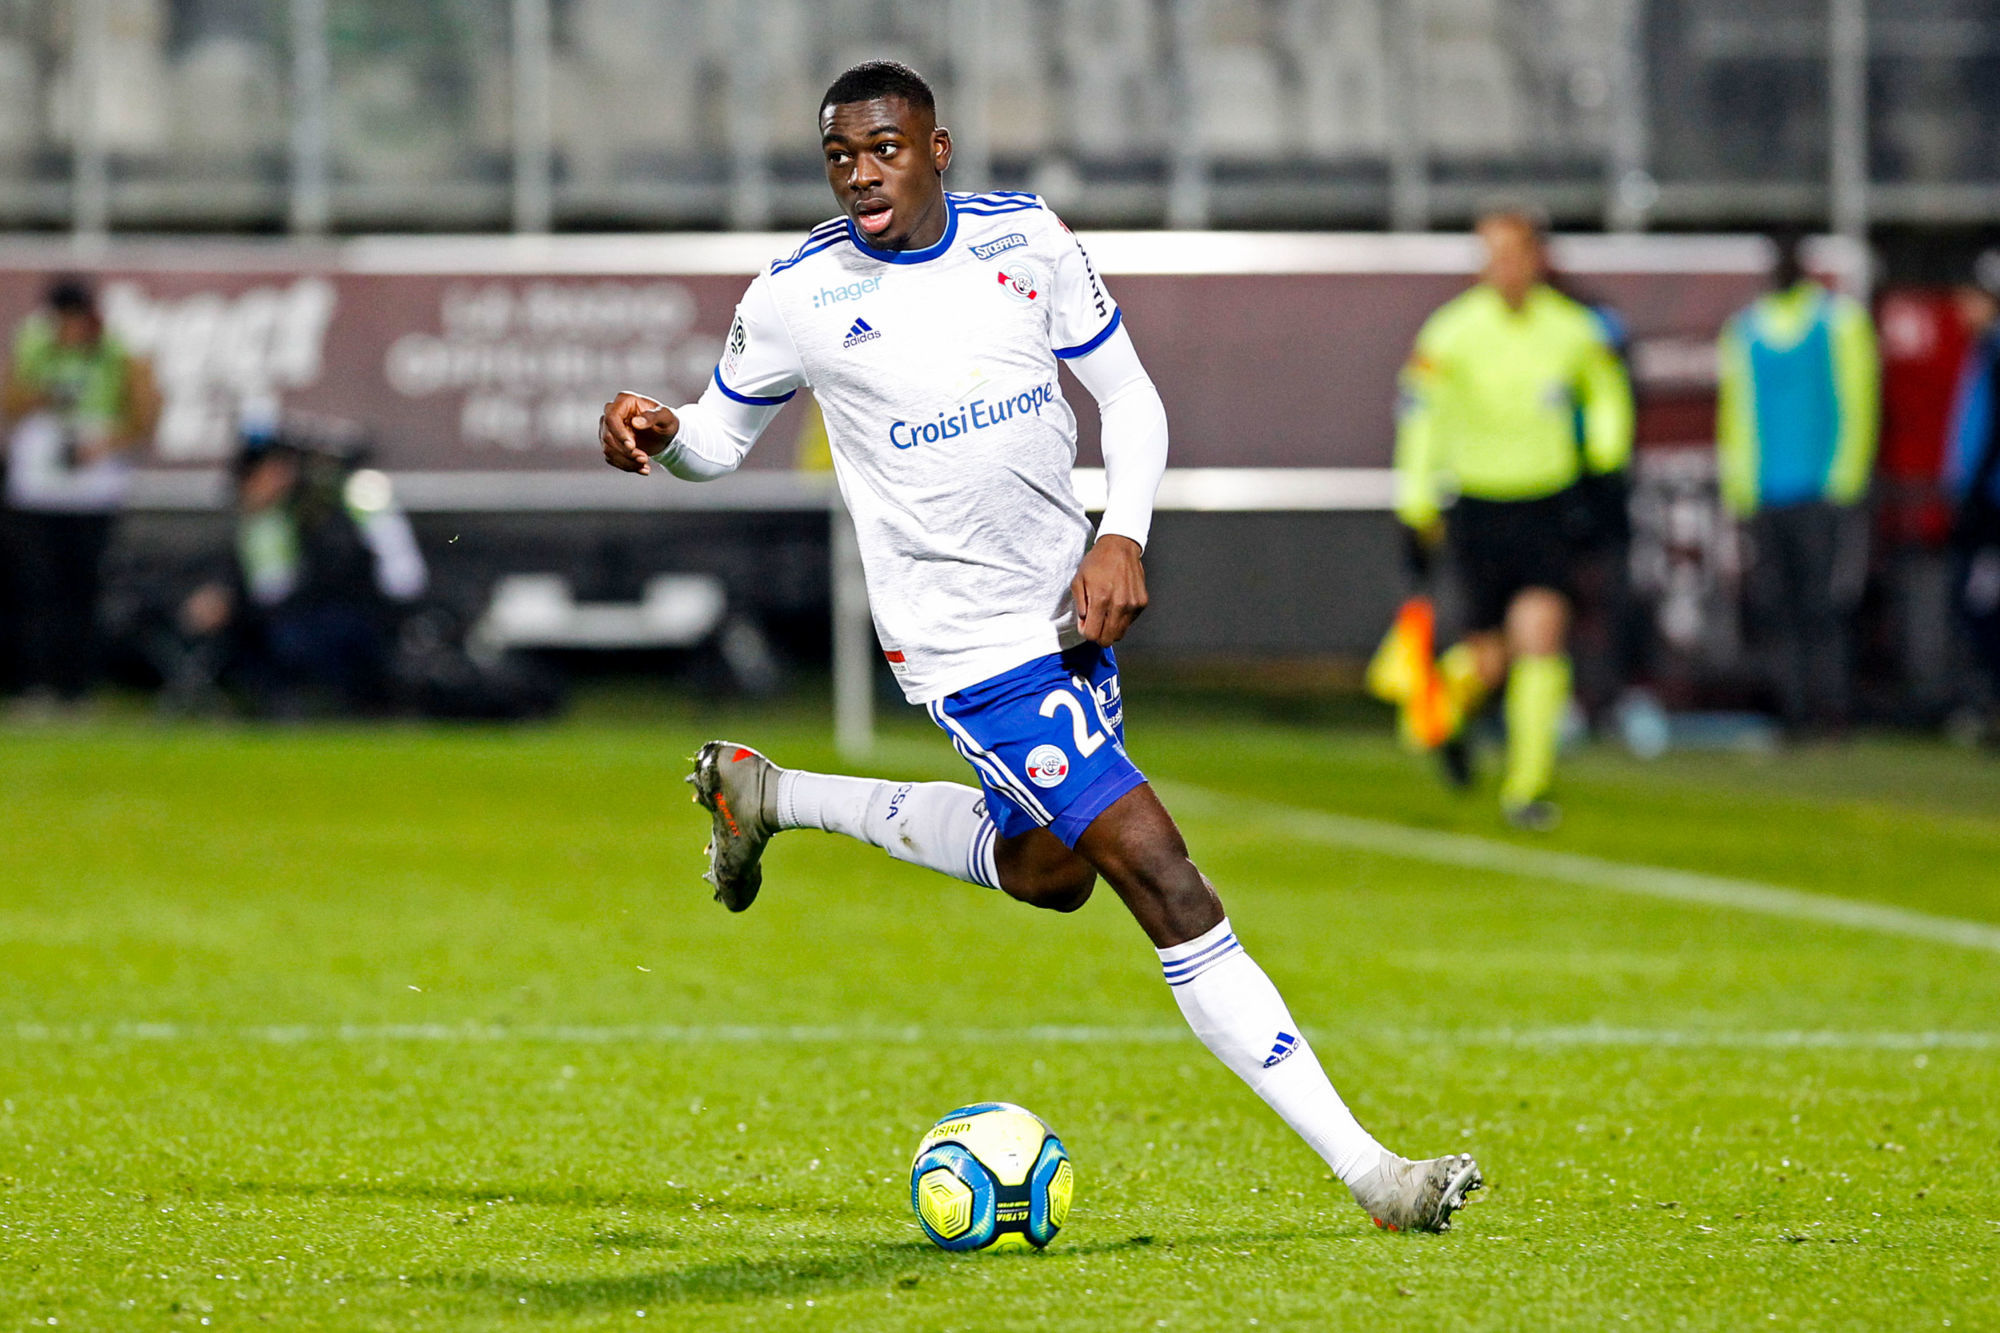 Youssouf Fofana of Strasbourg during the Ligue 1 match between FC Metz and RC Strasbourg at Stade Saint-Symphorien on January 11, 2020 in Metz, France. (Photo by Fred Marvaux/Icon Sport) - Youssouf FOFANA - Stade Saint-Symphorien - Metz (France)